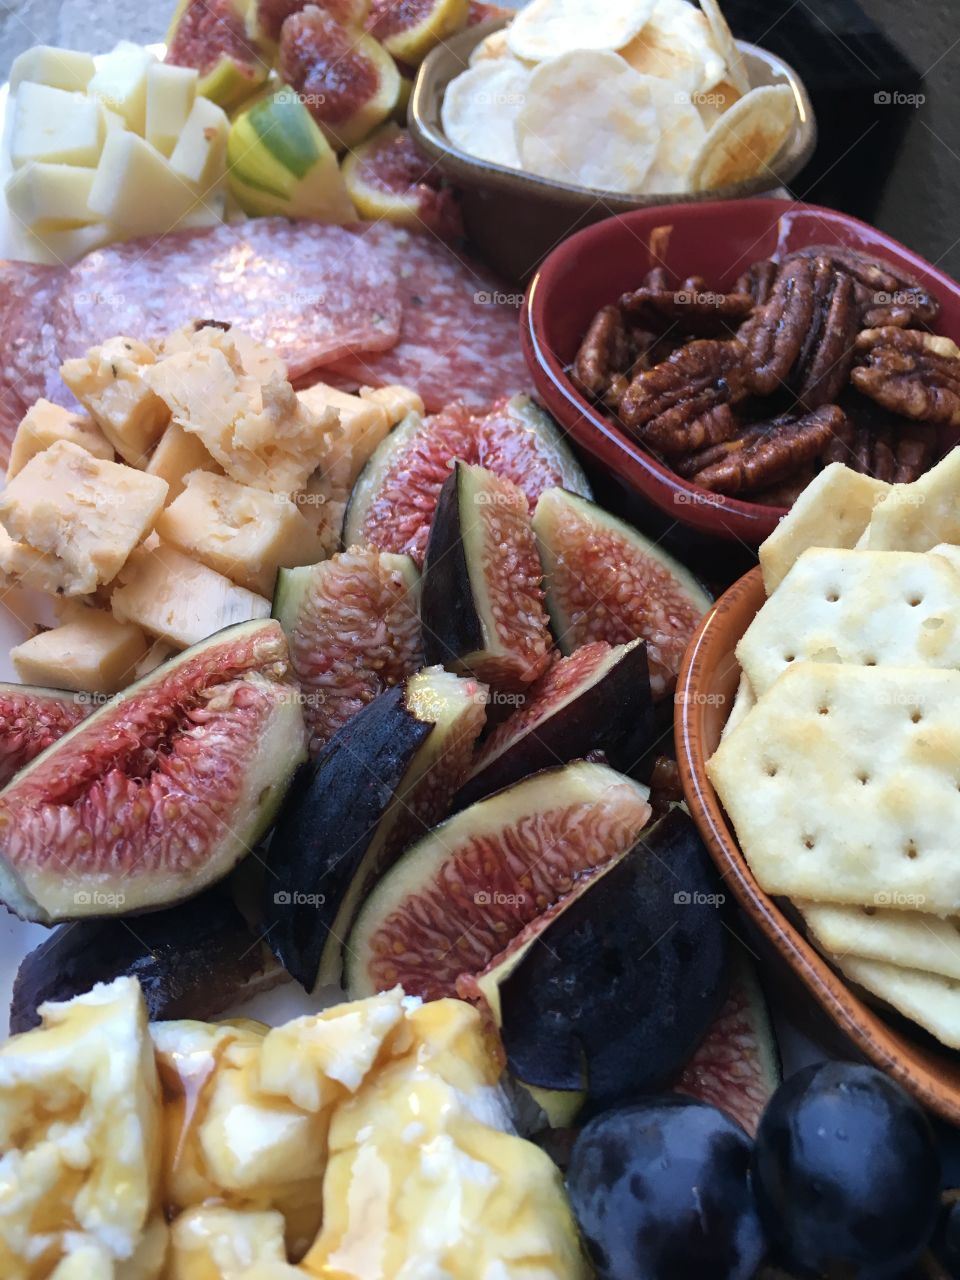 Cheese, figs and crackers 